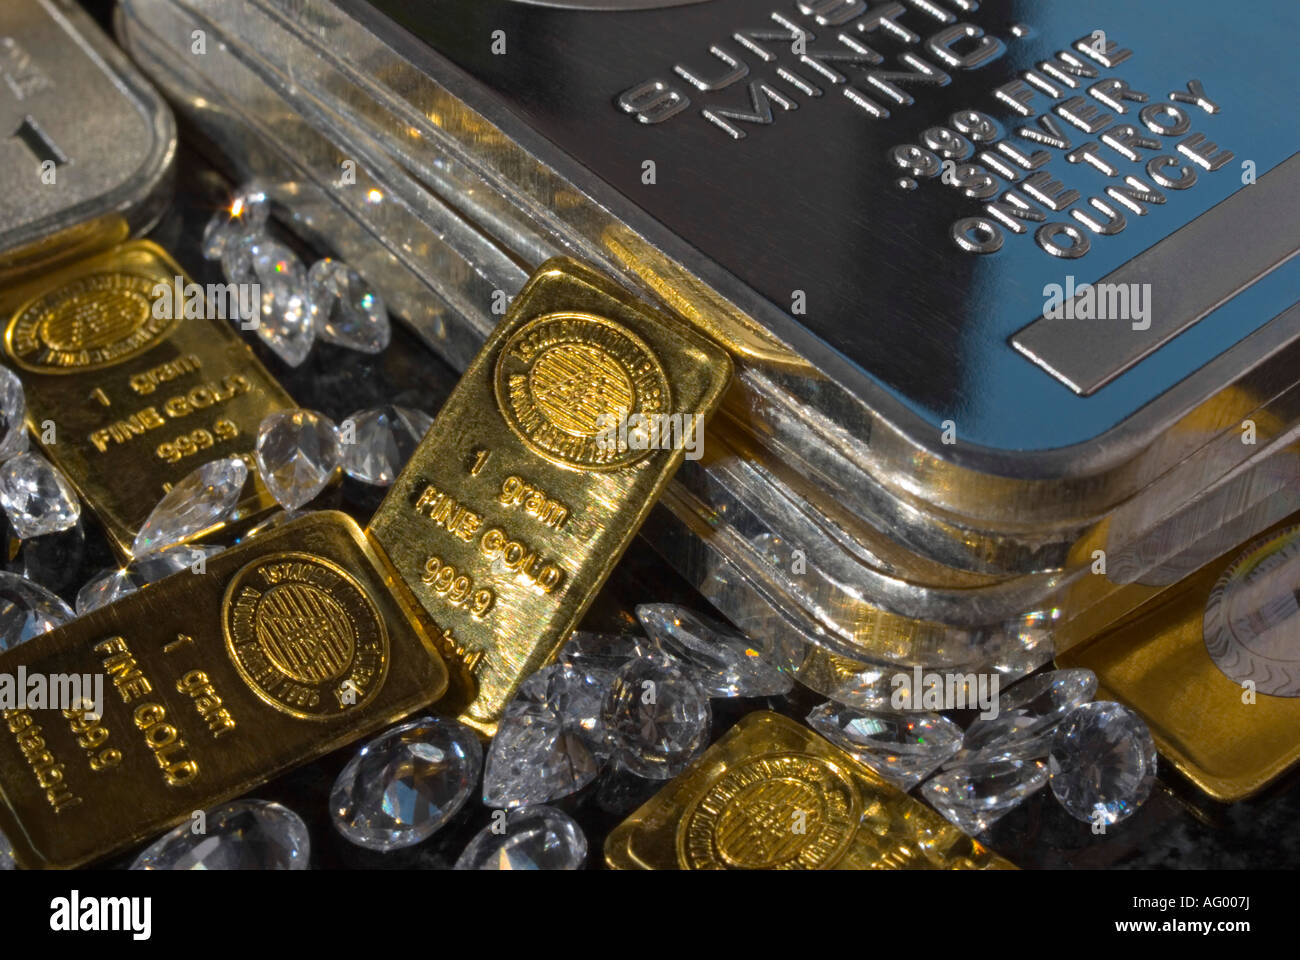 Amber Diamond On Gold Bars Stock Photo - Download Image Now